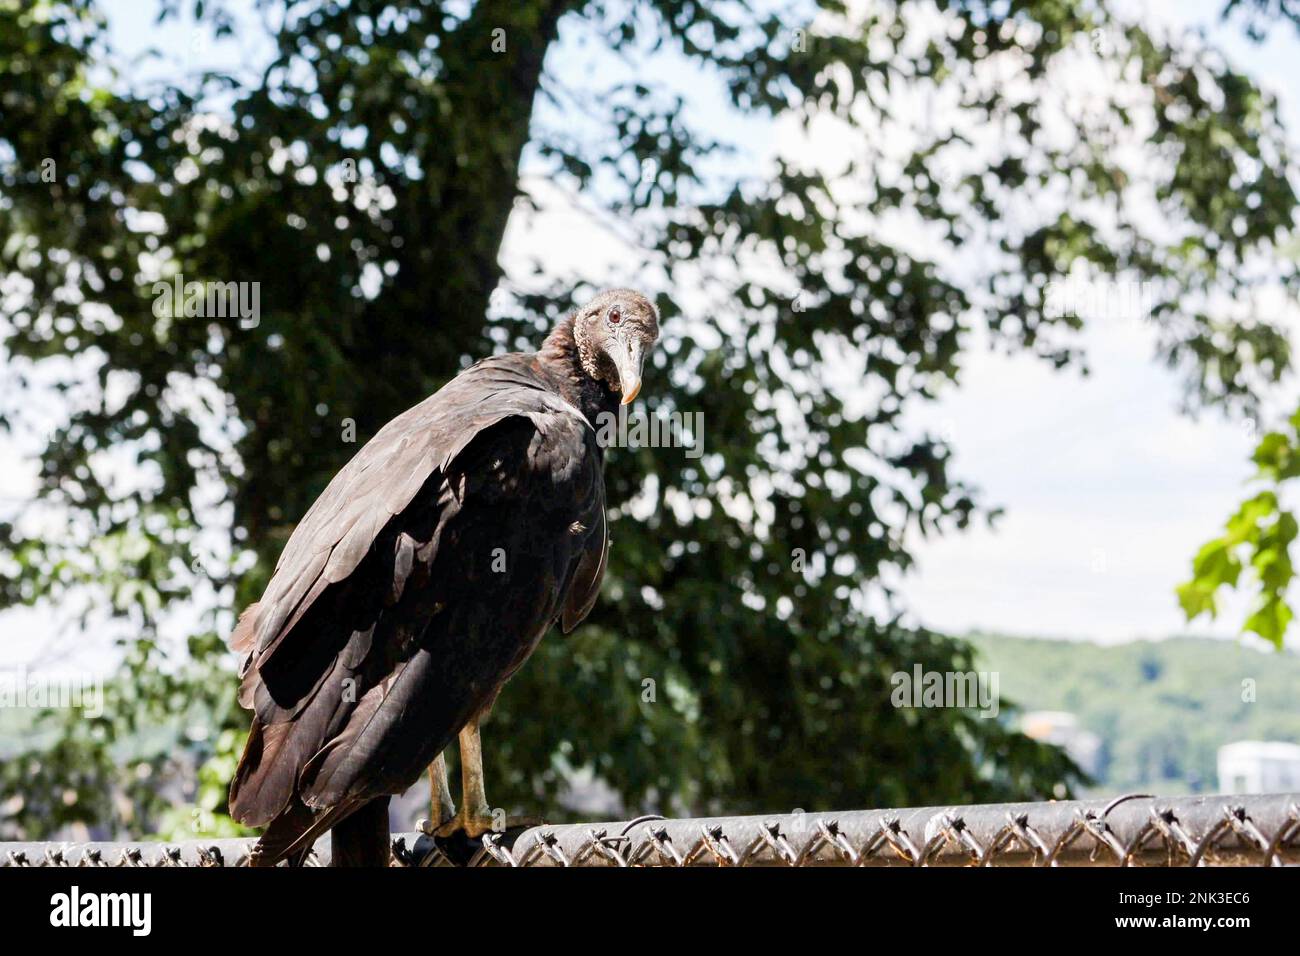 An american black vulture or buzzard sirs along the edge of a fence in Pennsylvania Stock Photo